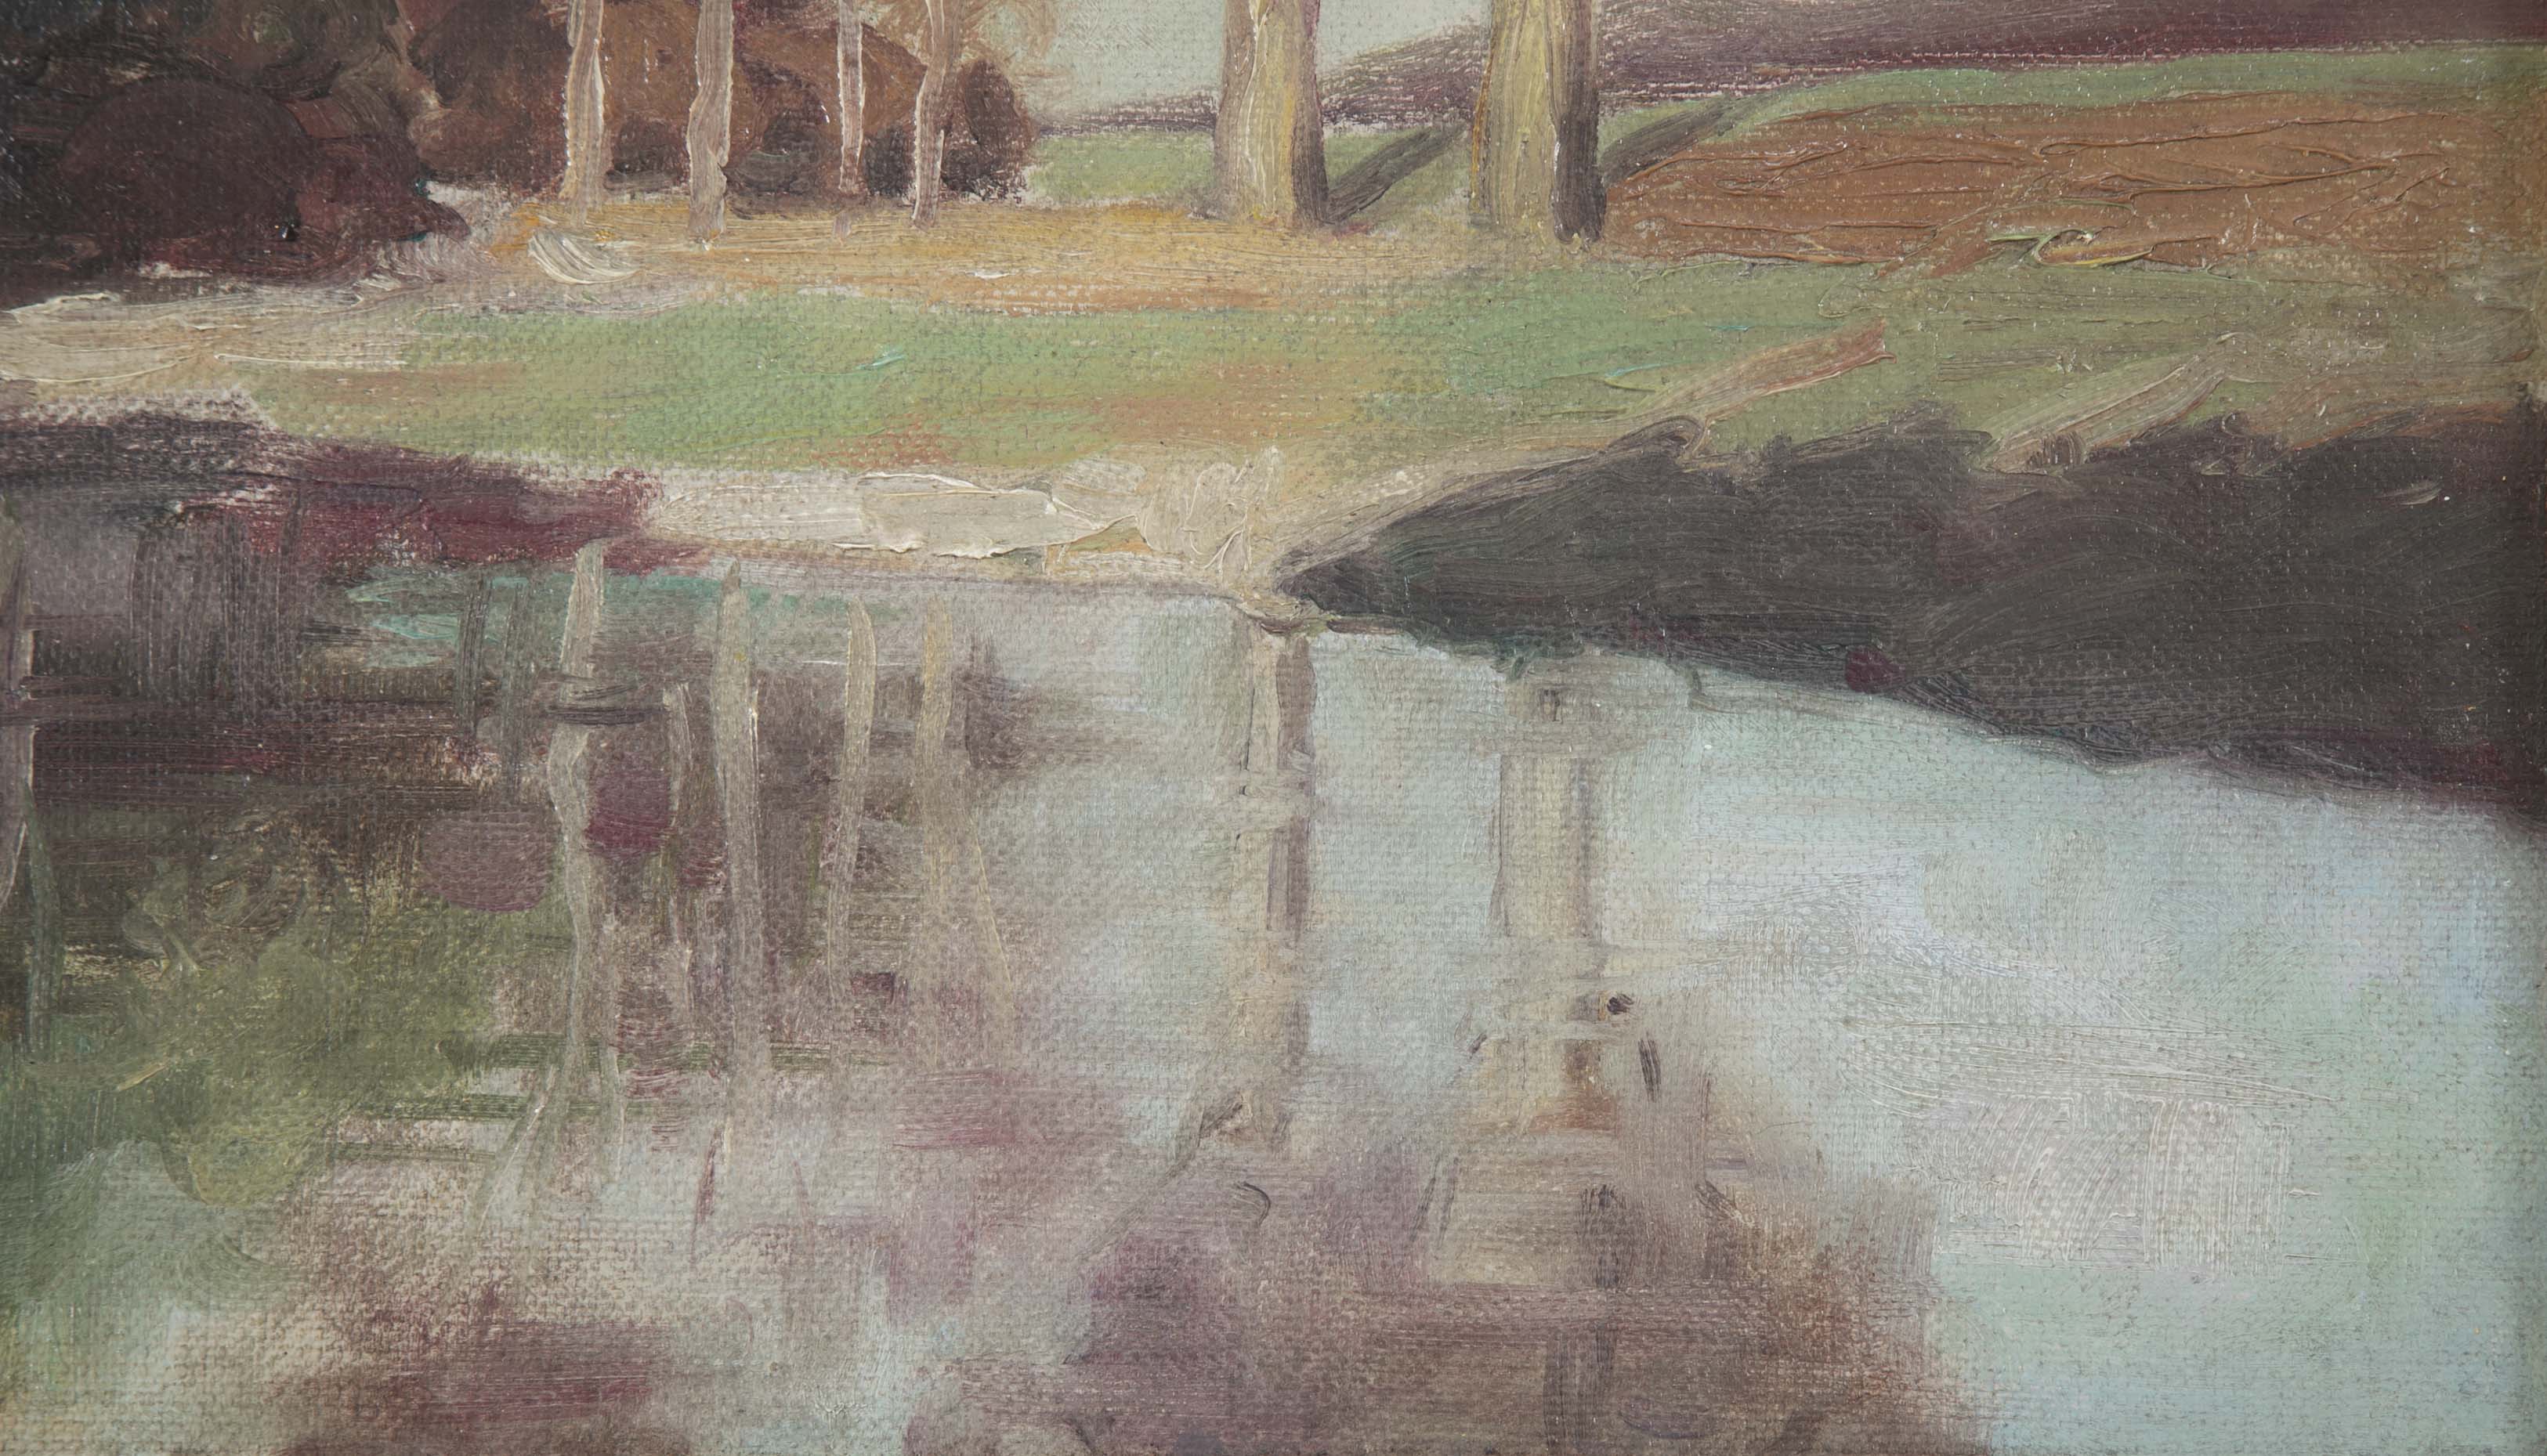 "Edge of the Pond" Oil on Canvas by William Chadwick